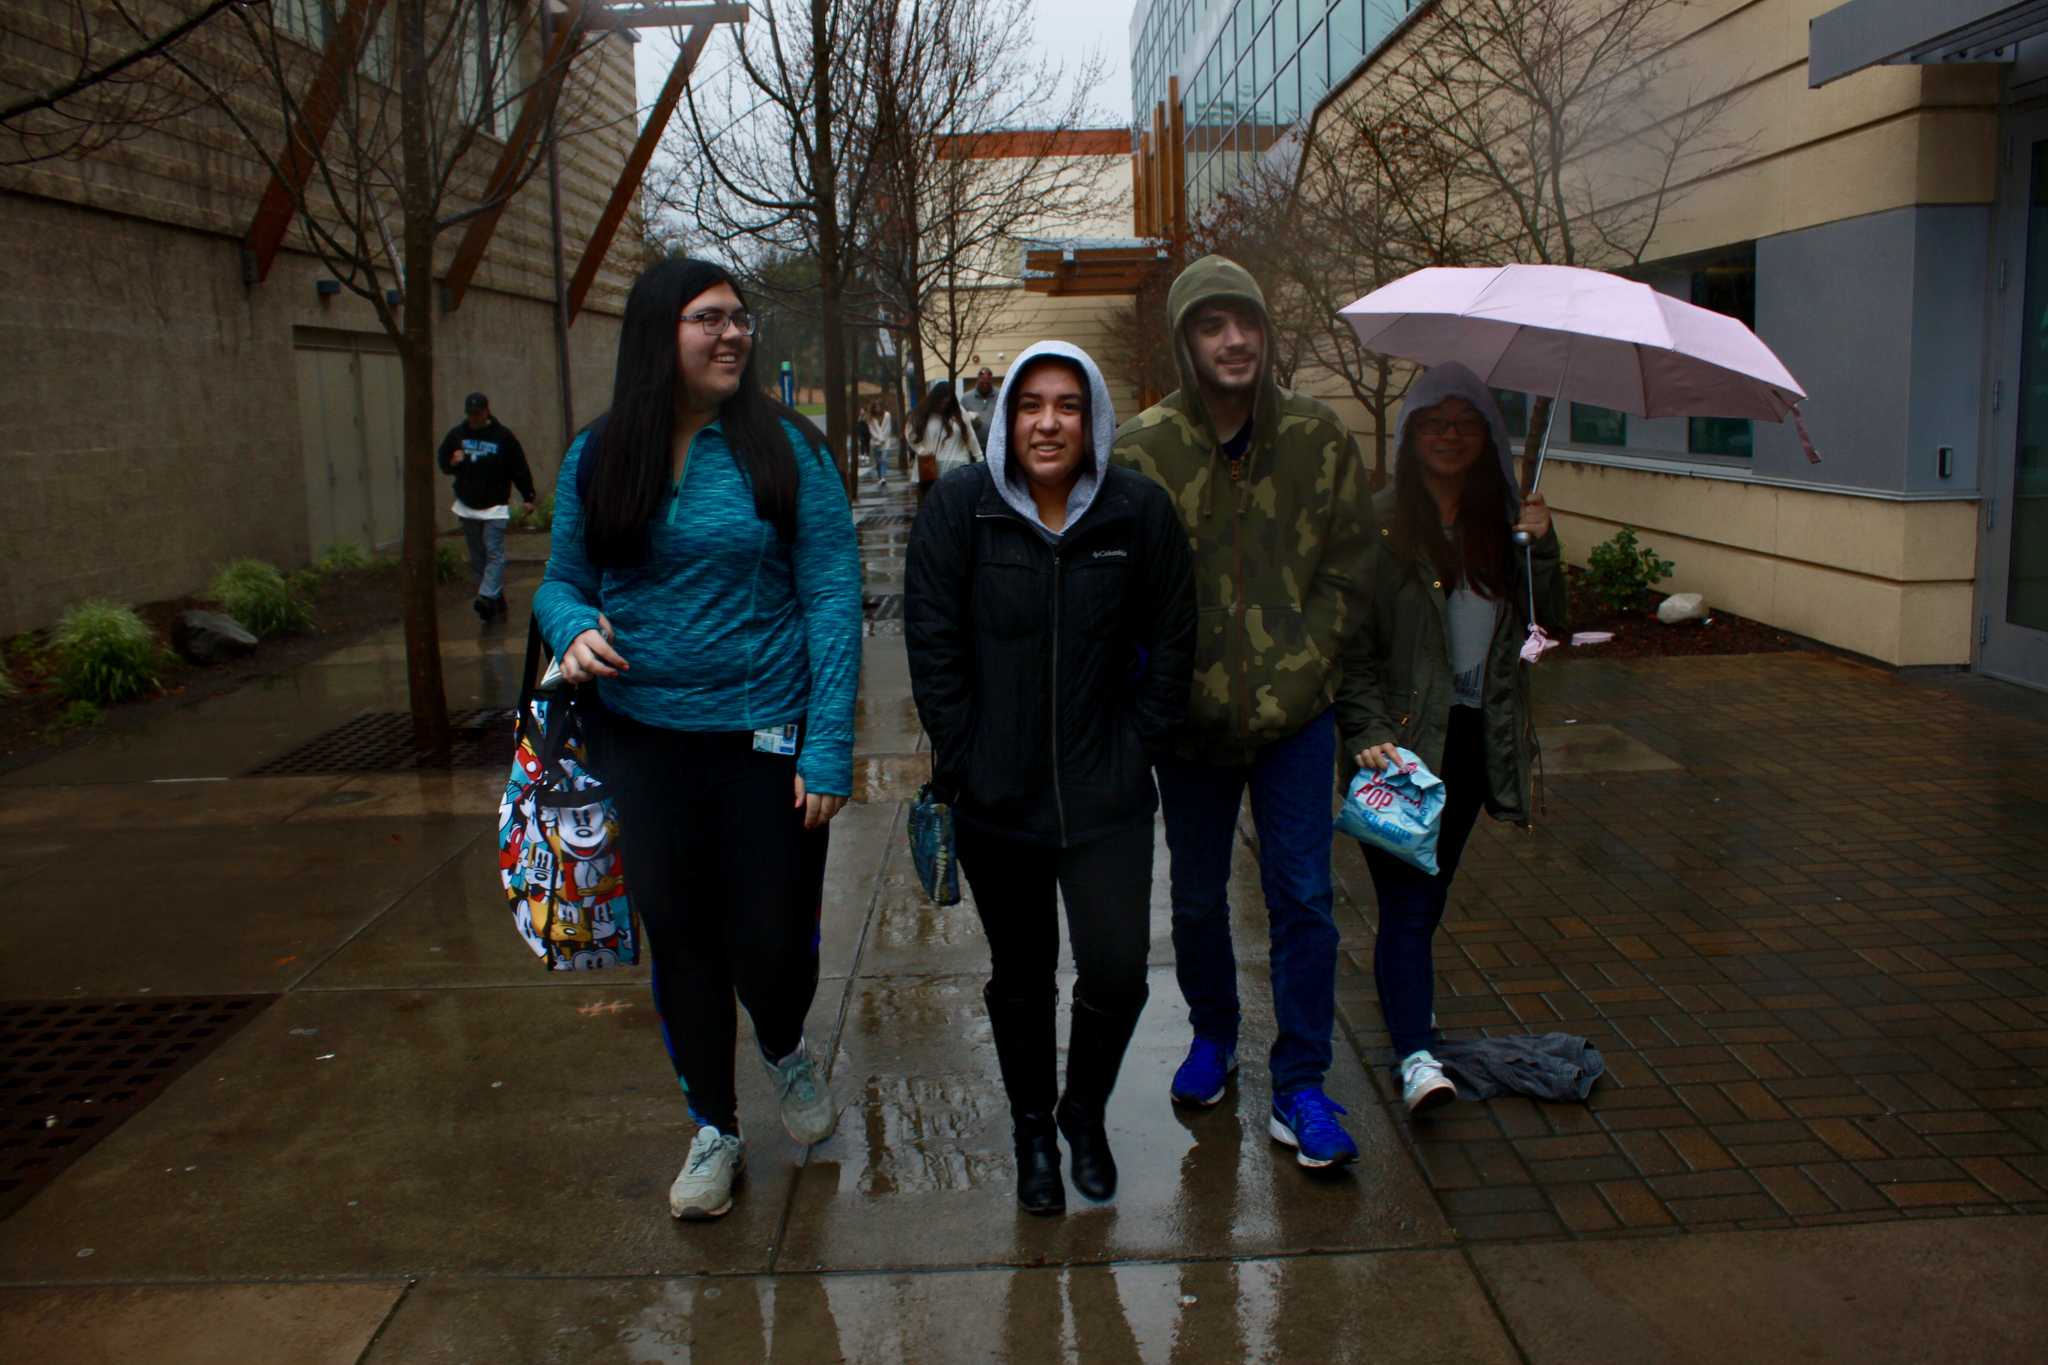 Students try to stay dry in the rainy weather on Sat. Feb. 16, 2019.